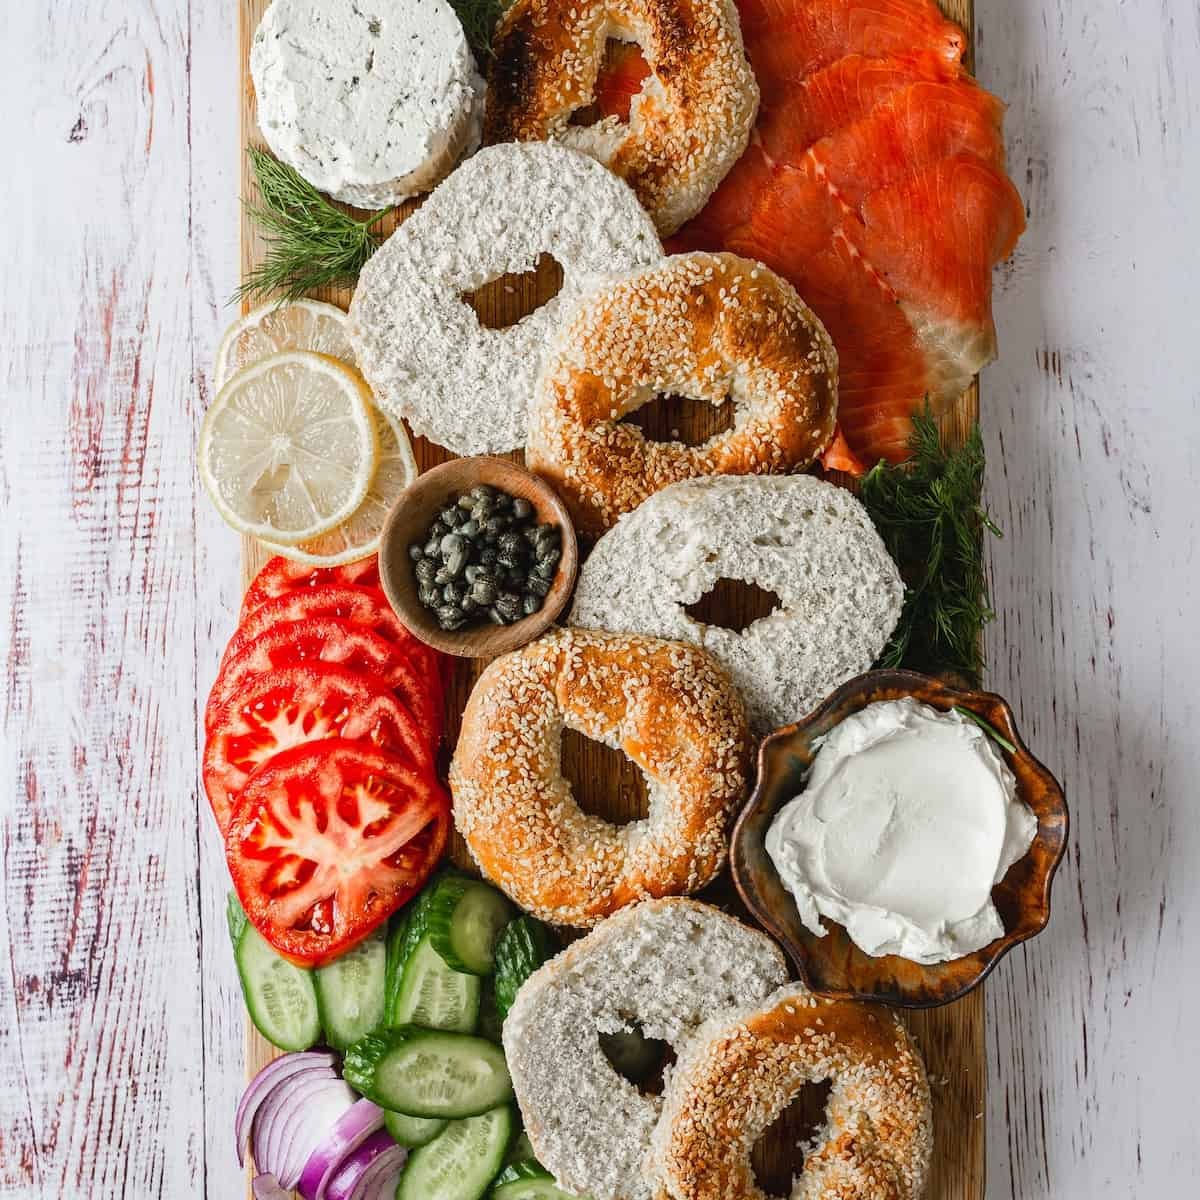 Cream Cheese and Lox Bagel Board for 5-Minute Brunch